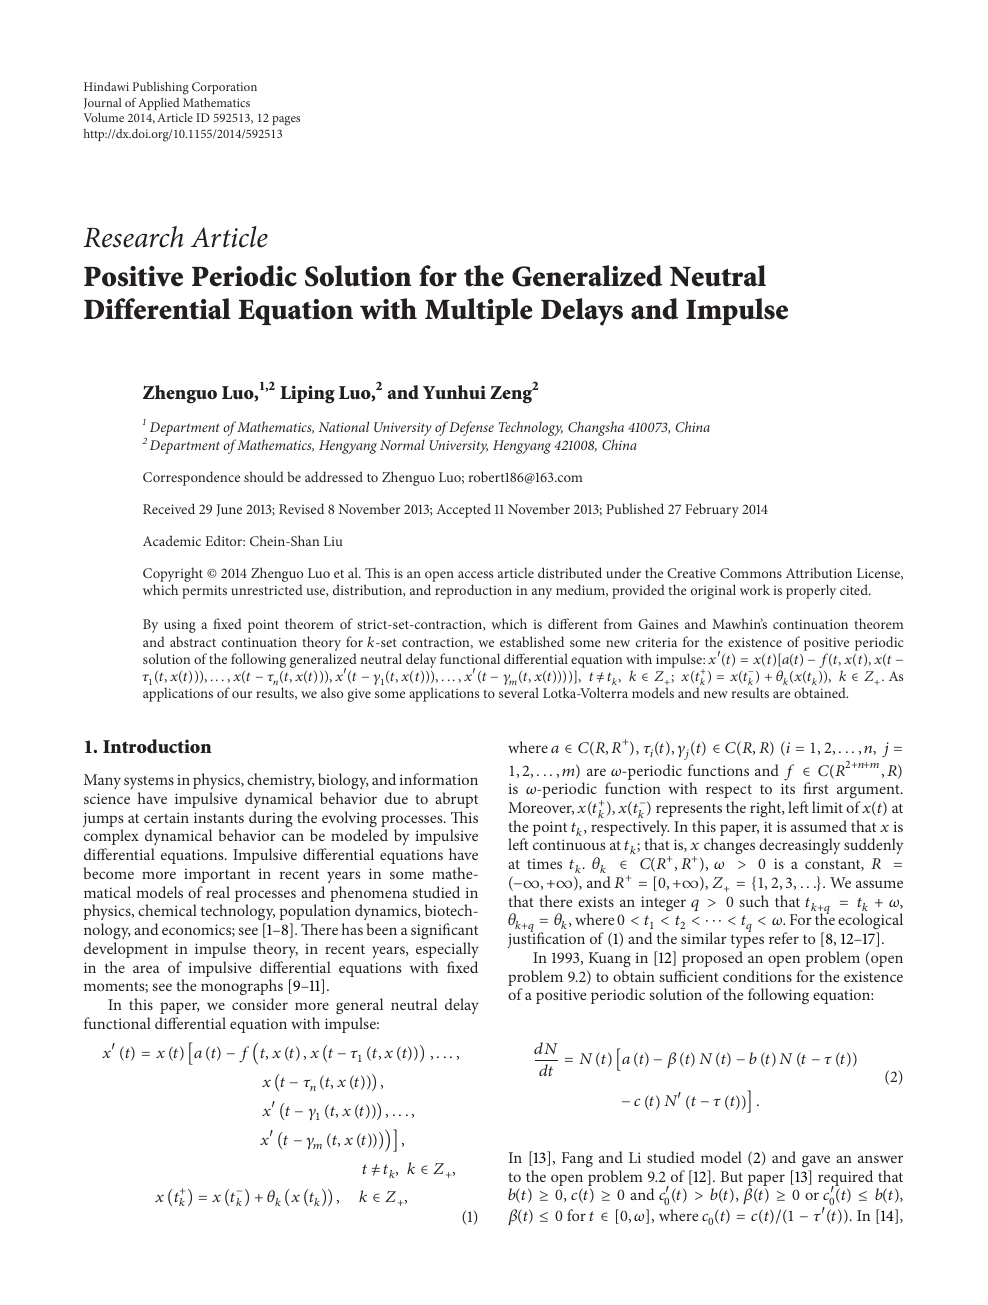 Positive Periodic Solution For The Generalized Neutral Differential Equation With Multiple Delays And Impulse Topic Of Research Paper In Mathematics Download Scholarly Article Pdf And Read For Free On Cyberleninka Open